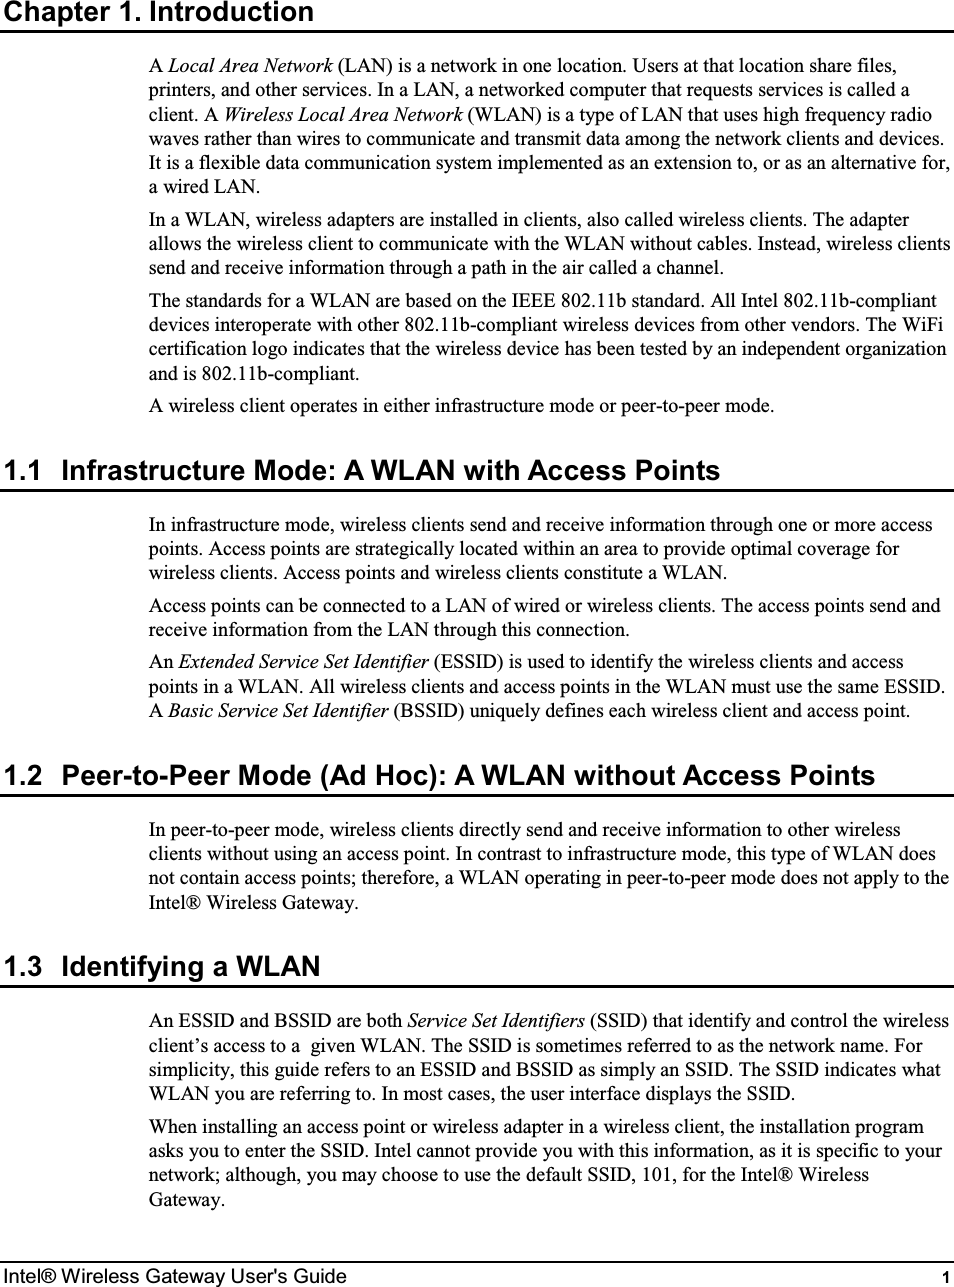  Intel® Wireless Gateway User&apos;s Guide  1 Chapter 1. Introduction A Local Area Network (LAN) is a network in one location. Users at that location share files, printers, and other services. In a LAN, a networked computer that requests services is called a client. A Wireless Local Area Network (WLAN) is a type of LAN that uses high frequency radio waves rather than wires to communicate and transmit data among the network clients and devices. It is a flexible data communication system implemented as an extension to, or as an alternative for, a wired LAN. In a WLAN, wireless adapters are installed in clients, also called wireless clients. The adapter allows the wireless client to communicate with the WLAN without cables. Instead, wireless clients send and receive information through a path in the air called a channel.  The standards for a WLAN are based on the IEEE 802.11b standard. All Intel 802.11b-compliant devices interoperate with other 802.11b-compliant wireless devices from other vendors. The WiFi certification logo indicates that the wireless device has been tested by an independent organization and is 802.11b-compliant.   A wireless client operates in either infrastructure mode or peer-to-peer mode.  1.1  Infrastructure Mode: A WLAN with Access Points In infrastructure mode, wireless clients send and receive information through one or more access points. Access points are strategically located within an area to provide optimal coverage for wireless clients. Access points and wireless clients constitute a WLAN. Access points can be connected to a LAN of wired or wireless clients. The access points send and receive information from the LAN through this connection. An Extended Service Set Identifier (ESSID) is used to identify the wireless clients and access points in a WLAN. All wireless clients and access points in the WLAN must use the same ESSID. A Basic Service Set Identifier (BSSID) uniquely defines each wireless client and access point. 1.2  Peer-to-Peer Mode (Ad Hoc): A WLAN without Access Points In peer-to-peer mode, wireless clients directly send and receive information to other wireless clients without using an access point. In contrast to infrastructure mode, this type of WLAN does not contain access points; therefore, a WLAN operating in peer-to-peer mode does not apply to the Intel® Wireless Gateway. 1.3  Identifying a WLAN An ESSID and BSSID are both Service Set Identifiers (SSID) that identify and control the wireless client’s access to a  given WLAN. The SSID is sometimes referred to as the network name. For simplicity, this guide refers to an ESSID and BSSID as simply an SSID. The SSID indicates what WLAN you are referring to. In most cases, the user interface displays the SSID.  When installing an access point or wireless adapter in a wireless client, the installation program asks you to enter the SSID. Intel cannot provide you with this information, as it is specific to your network; although, you may choose to use the default SSID, 101, for the Intel® Wireless Gateway.  